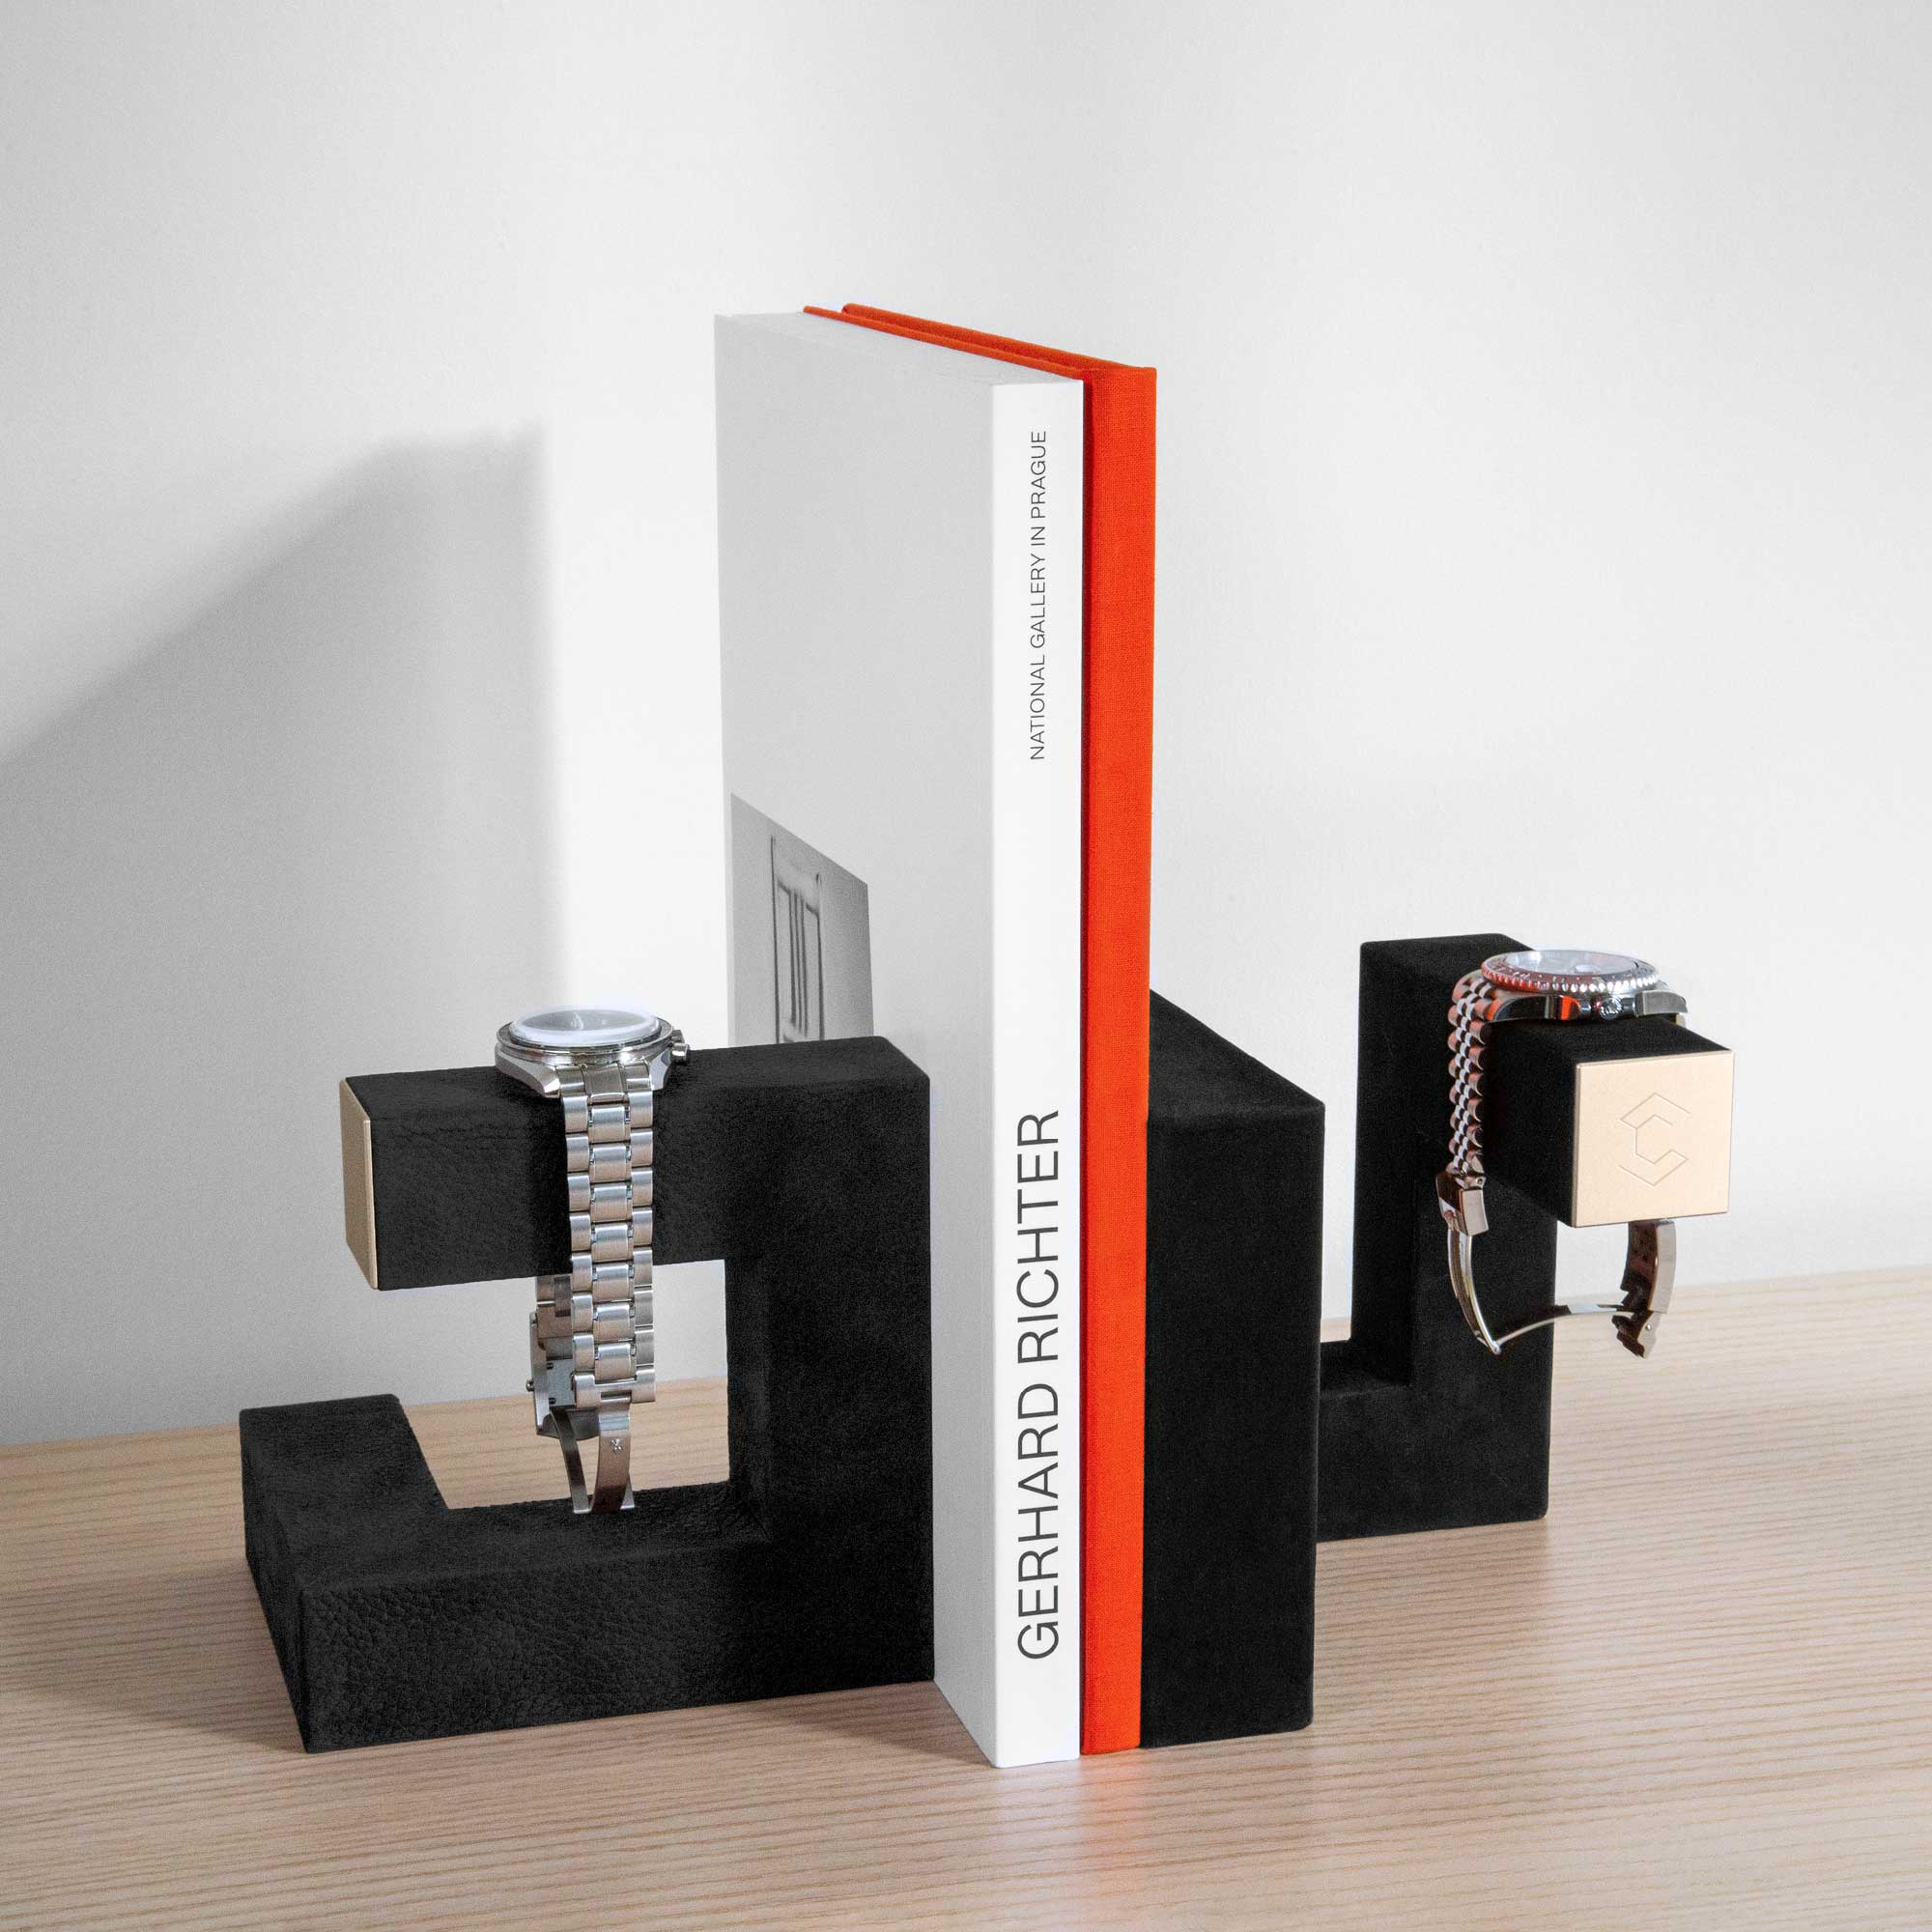 Hudson Duo gold watch stands displaying watches and serving as book ends at home